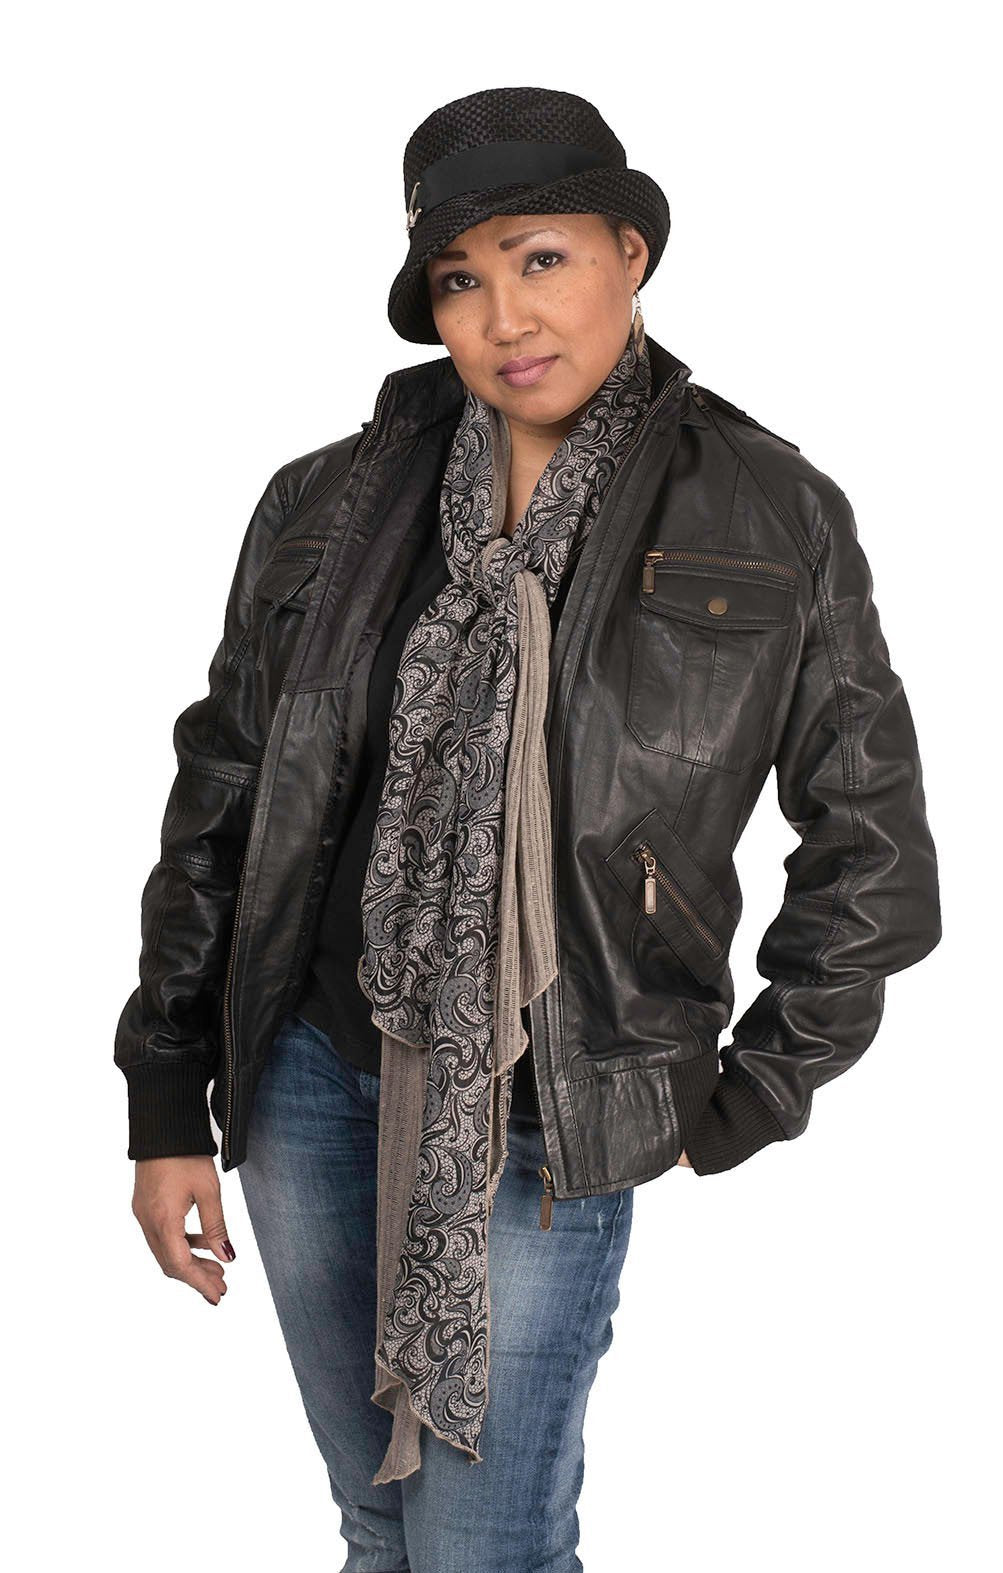  Women wearing a leather coat a Samatha Bucket style hat and Handkerchief Scarf, Wrap | Cotton Voile, in Earth ( Taupe, Tan) with Venetian chiffon print (Taupe and Black) | Handmade in Seattle WA | Pandemonium Millinery